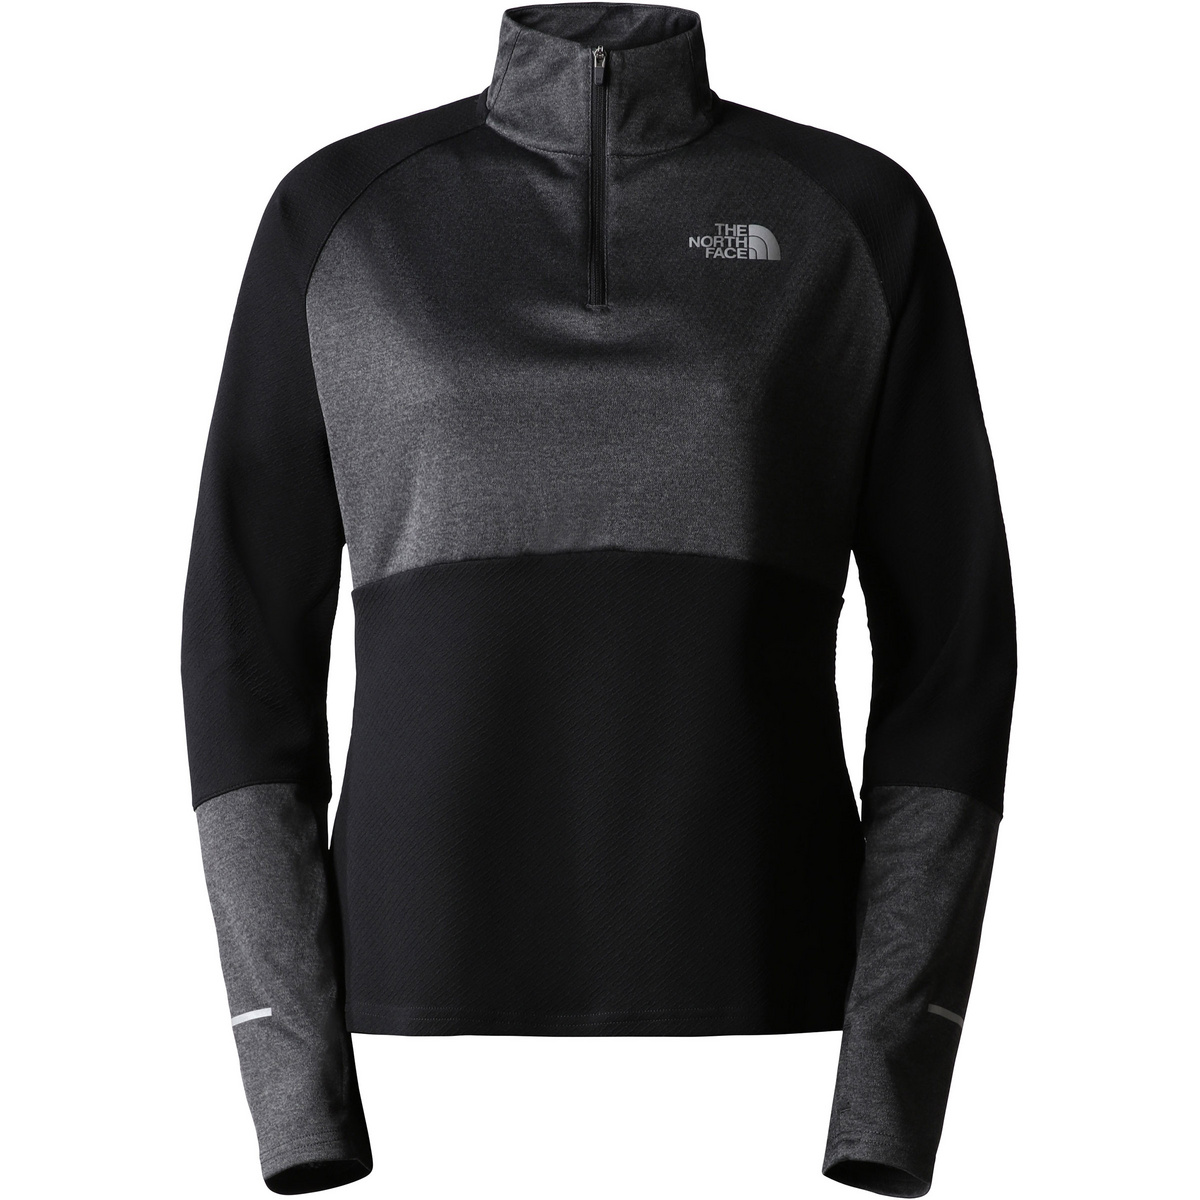 Image of The North Face Donna 1-4 Zip Run Fleece Pullover